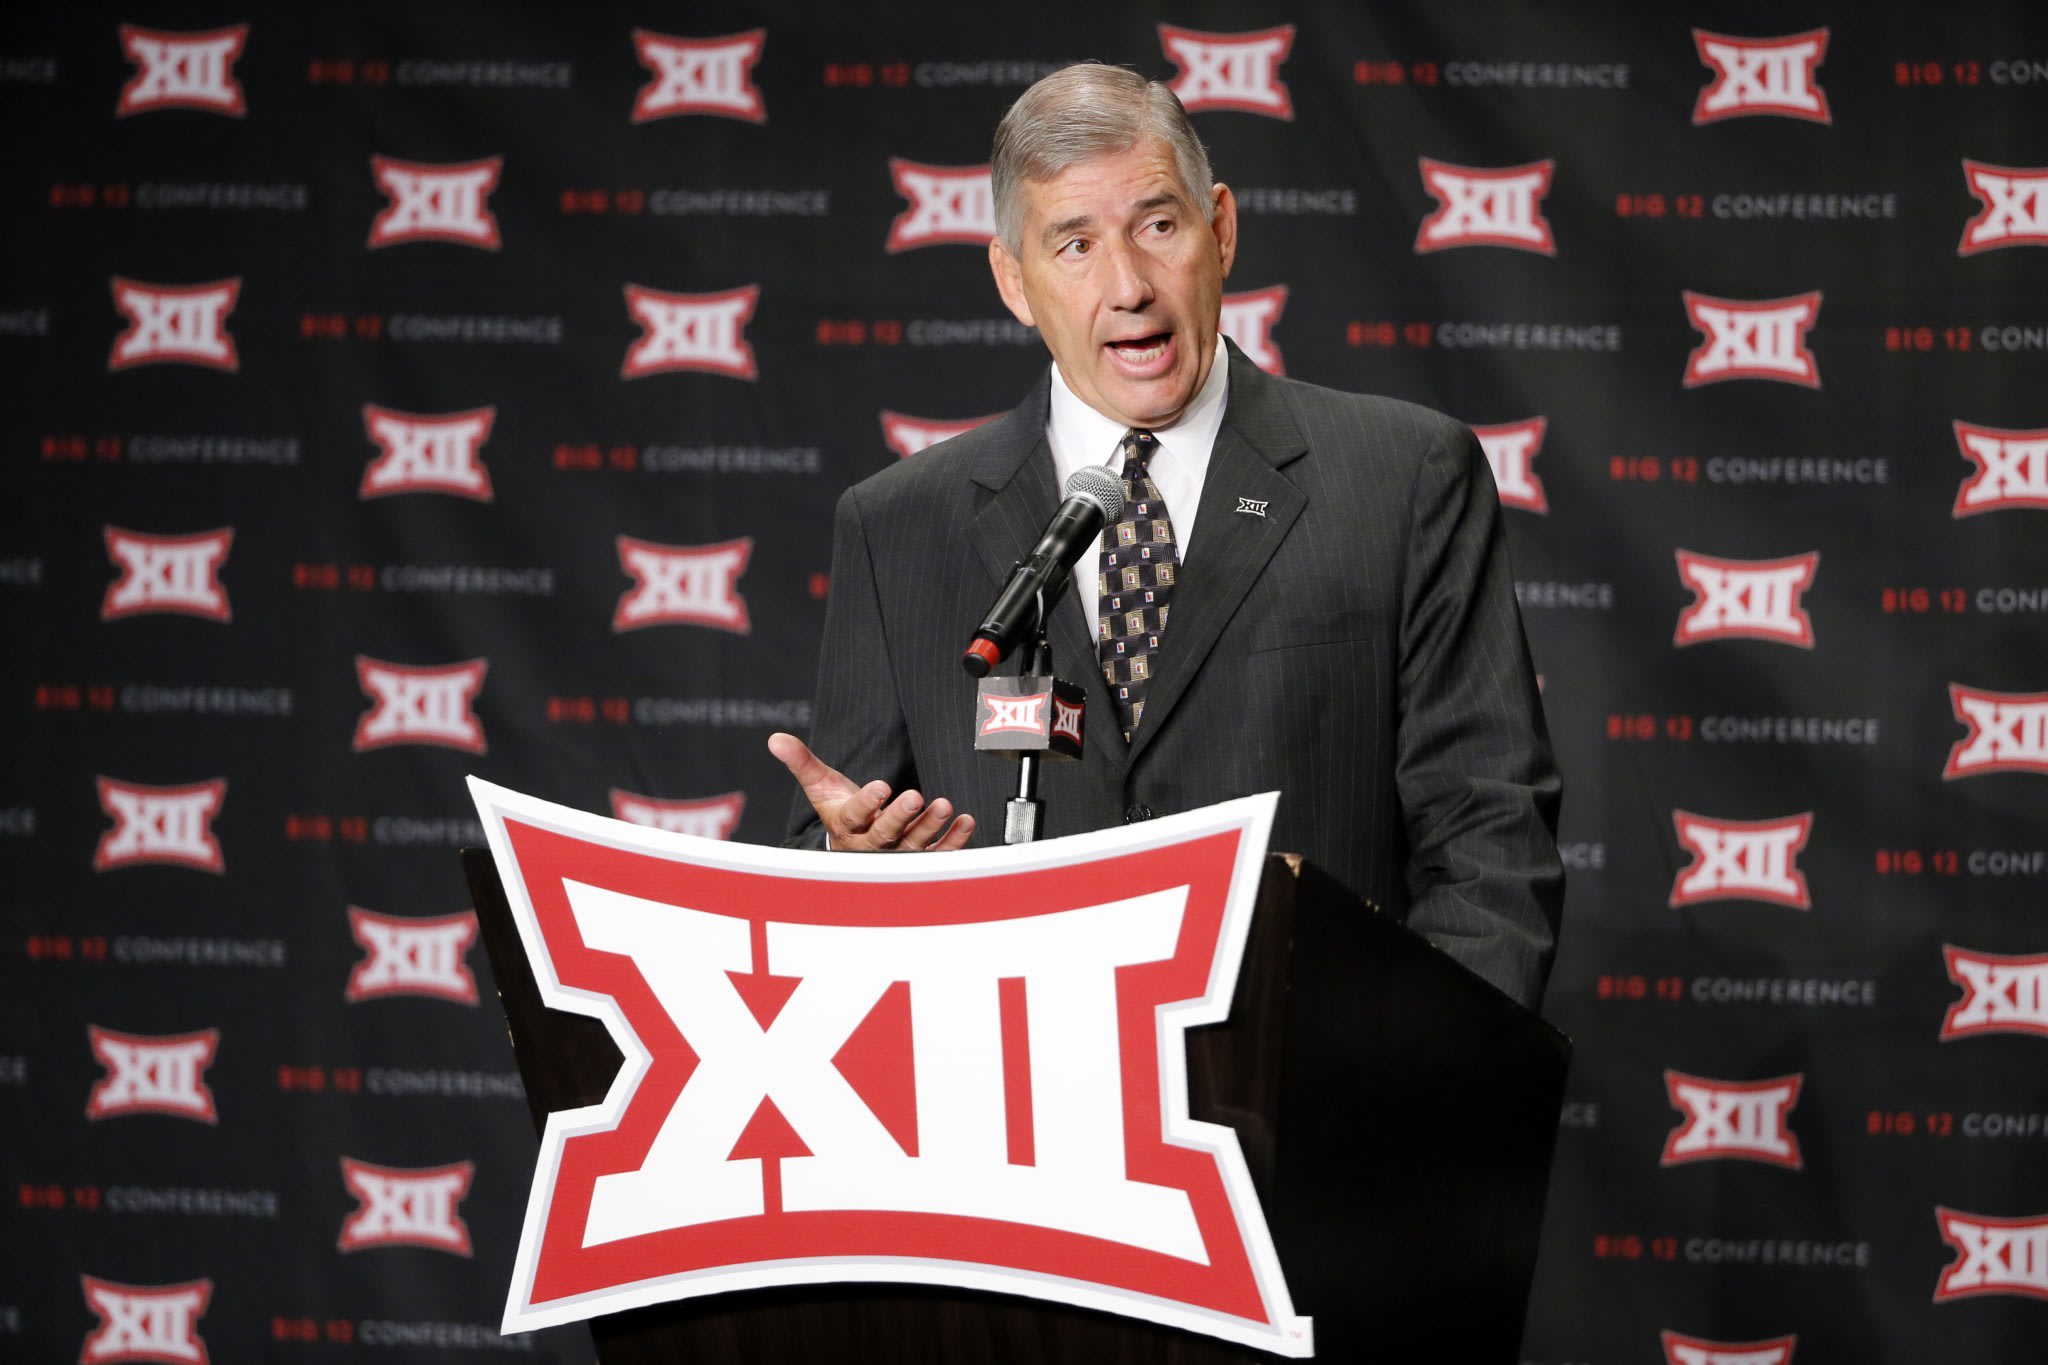 Big 12 commissioner Bob Bowlsby addresses attendees during Big 12 media day, Monday, July 18, 2016, in Dallas. With expansion still an unsettled issue...